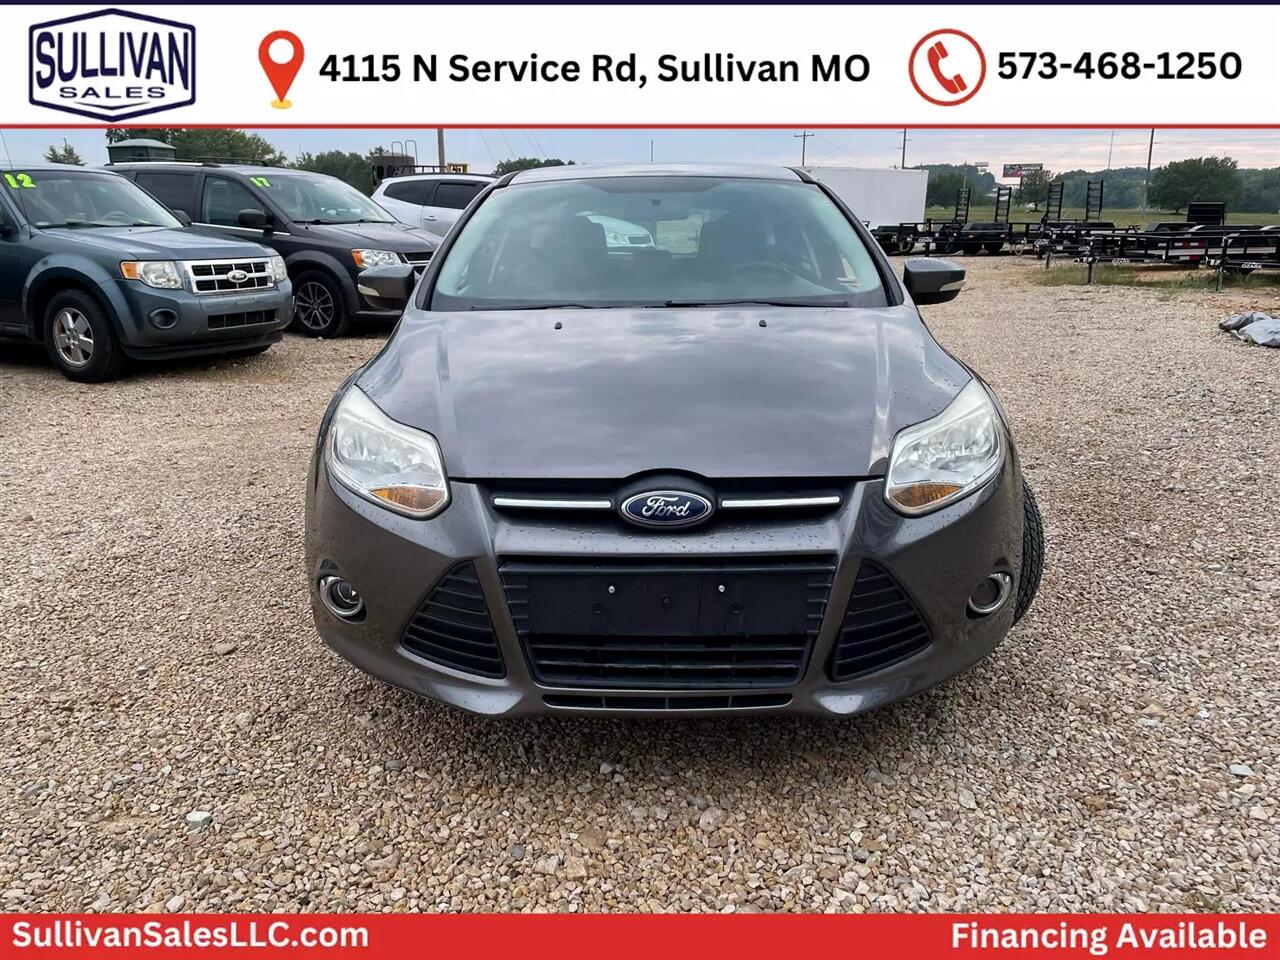 Used 2014 Ford Focus SE with VIN 1FADP3K20EL111902 for sale in Sullivan, MO